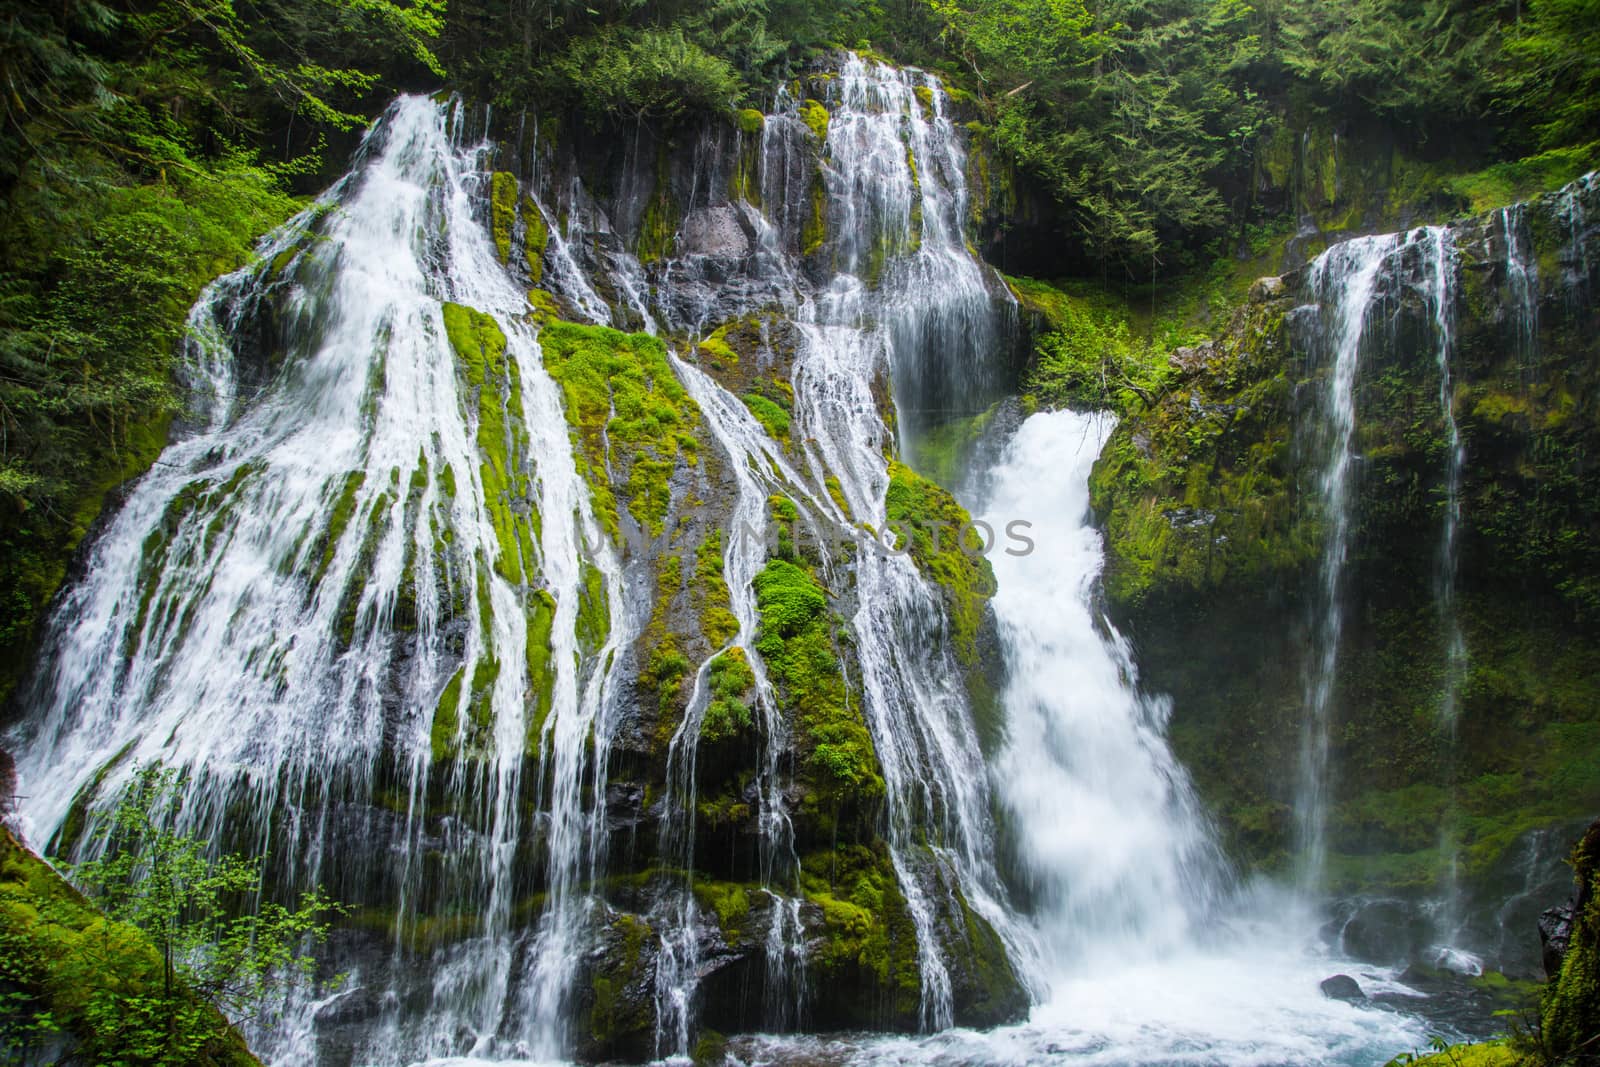 One of Washington's most photographed waterfalls, despite the climb to get to it.